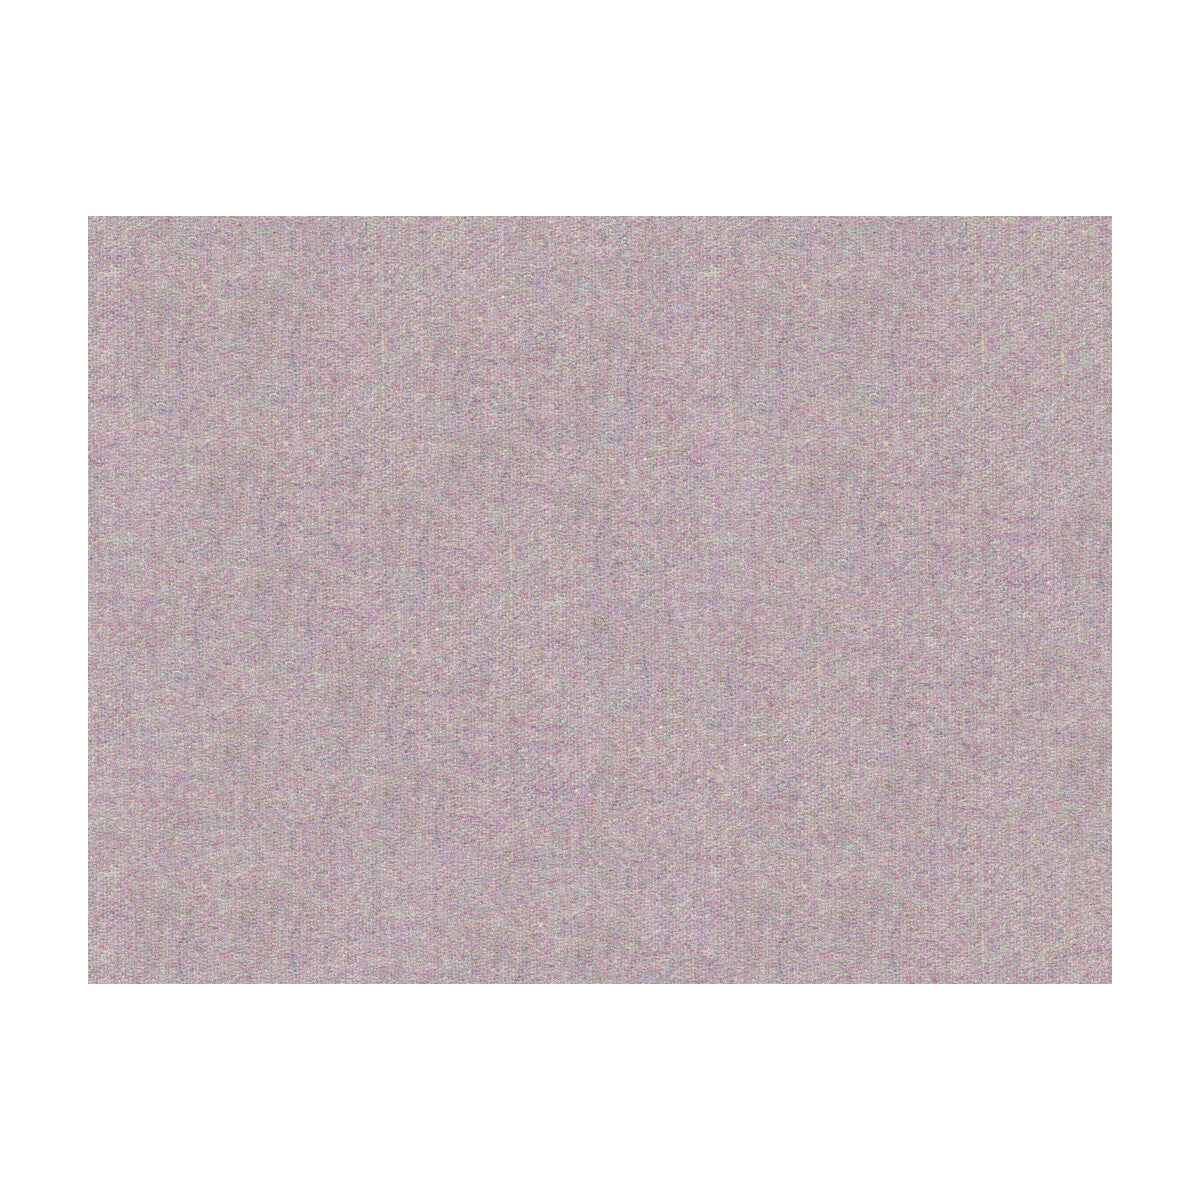 Chevalier Wool fabric in heather color - pattern 8013149.710.0 - by Brunschwig &amp; Fils